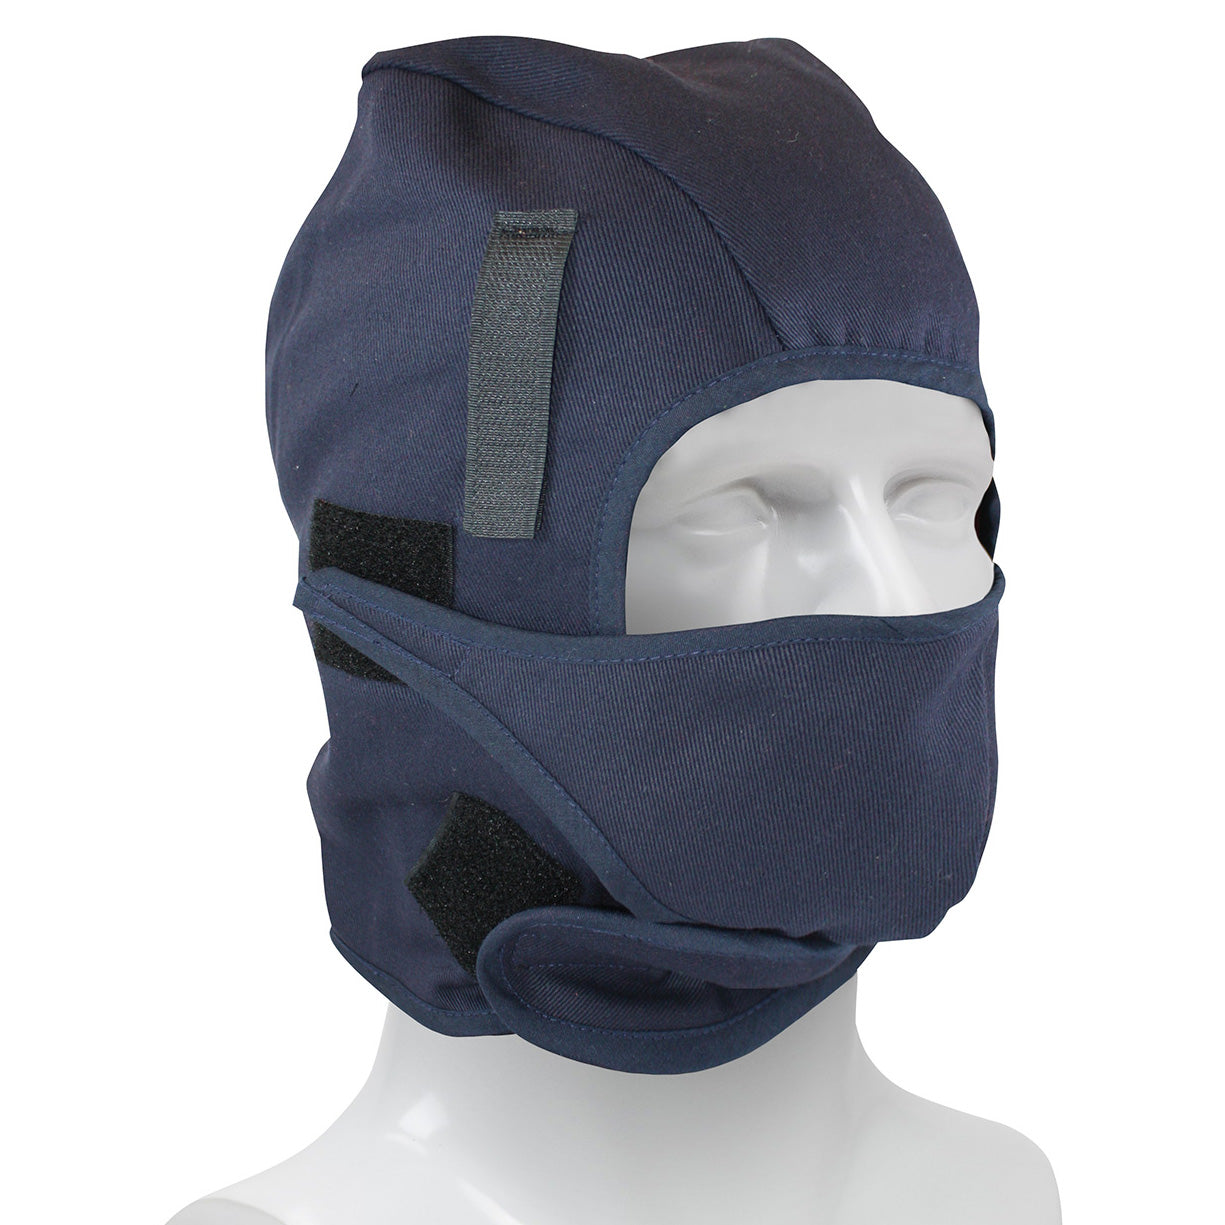 PIP Two-Layer Cotton Twill/Fleece Hard Hat Liner with Mouthpiece and FR Shell - Mid Length